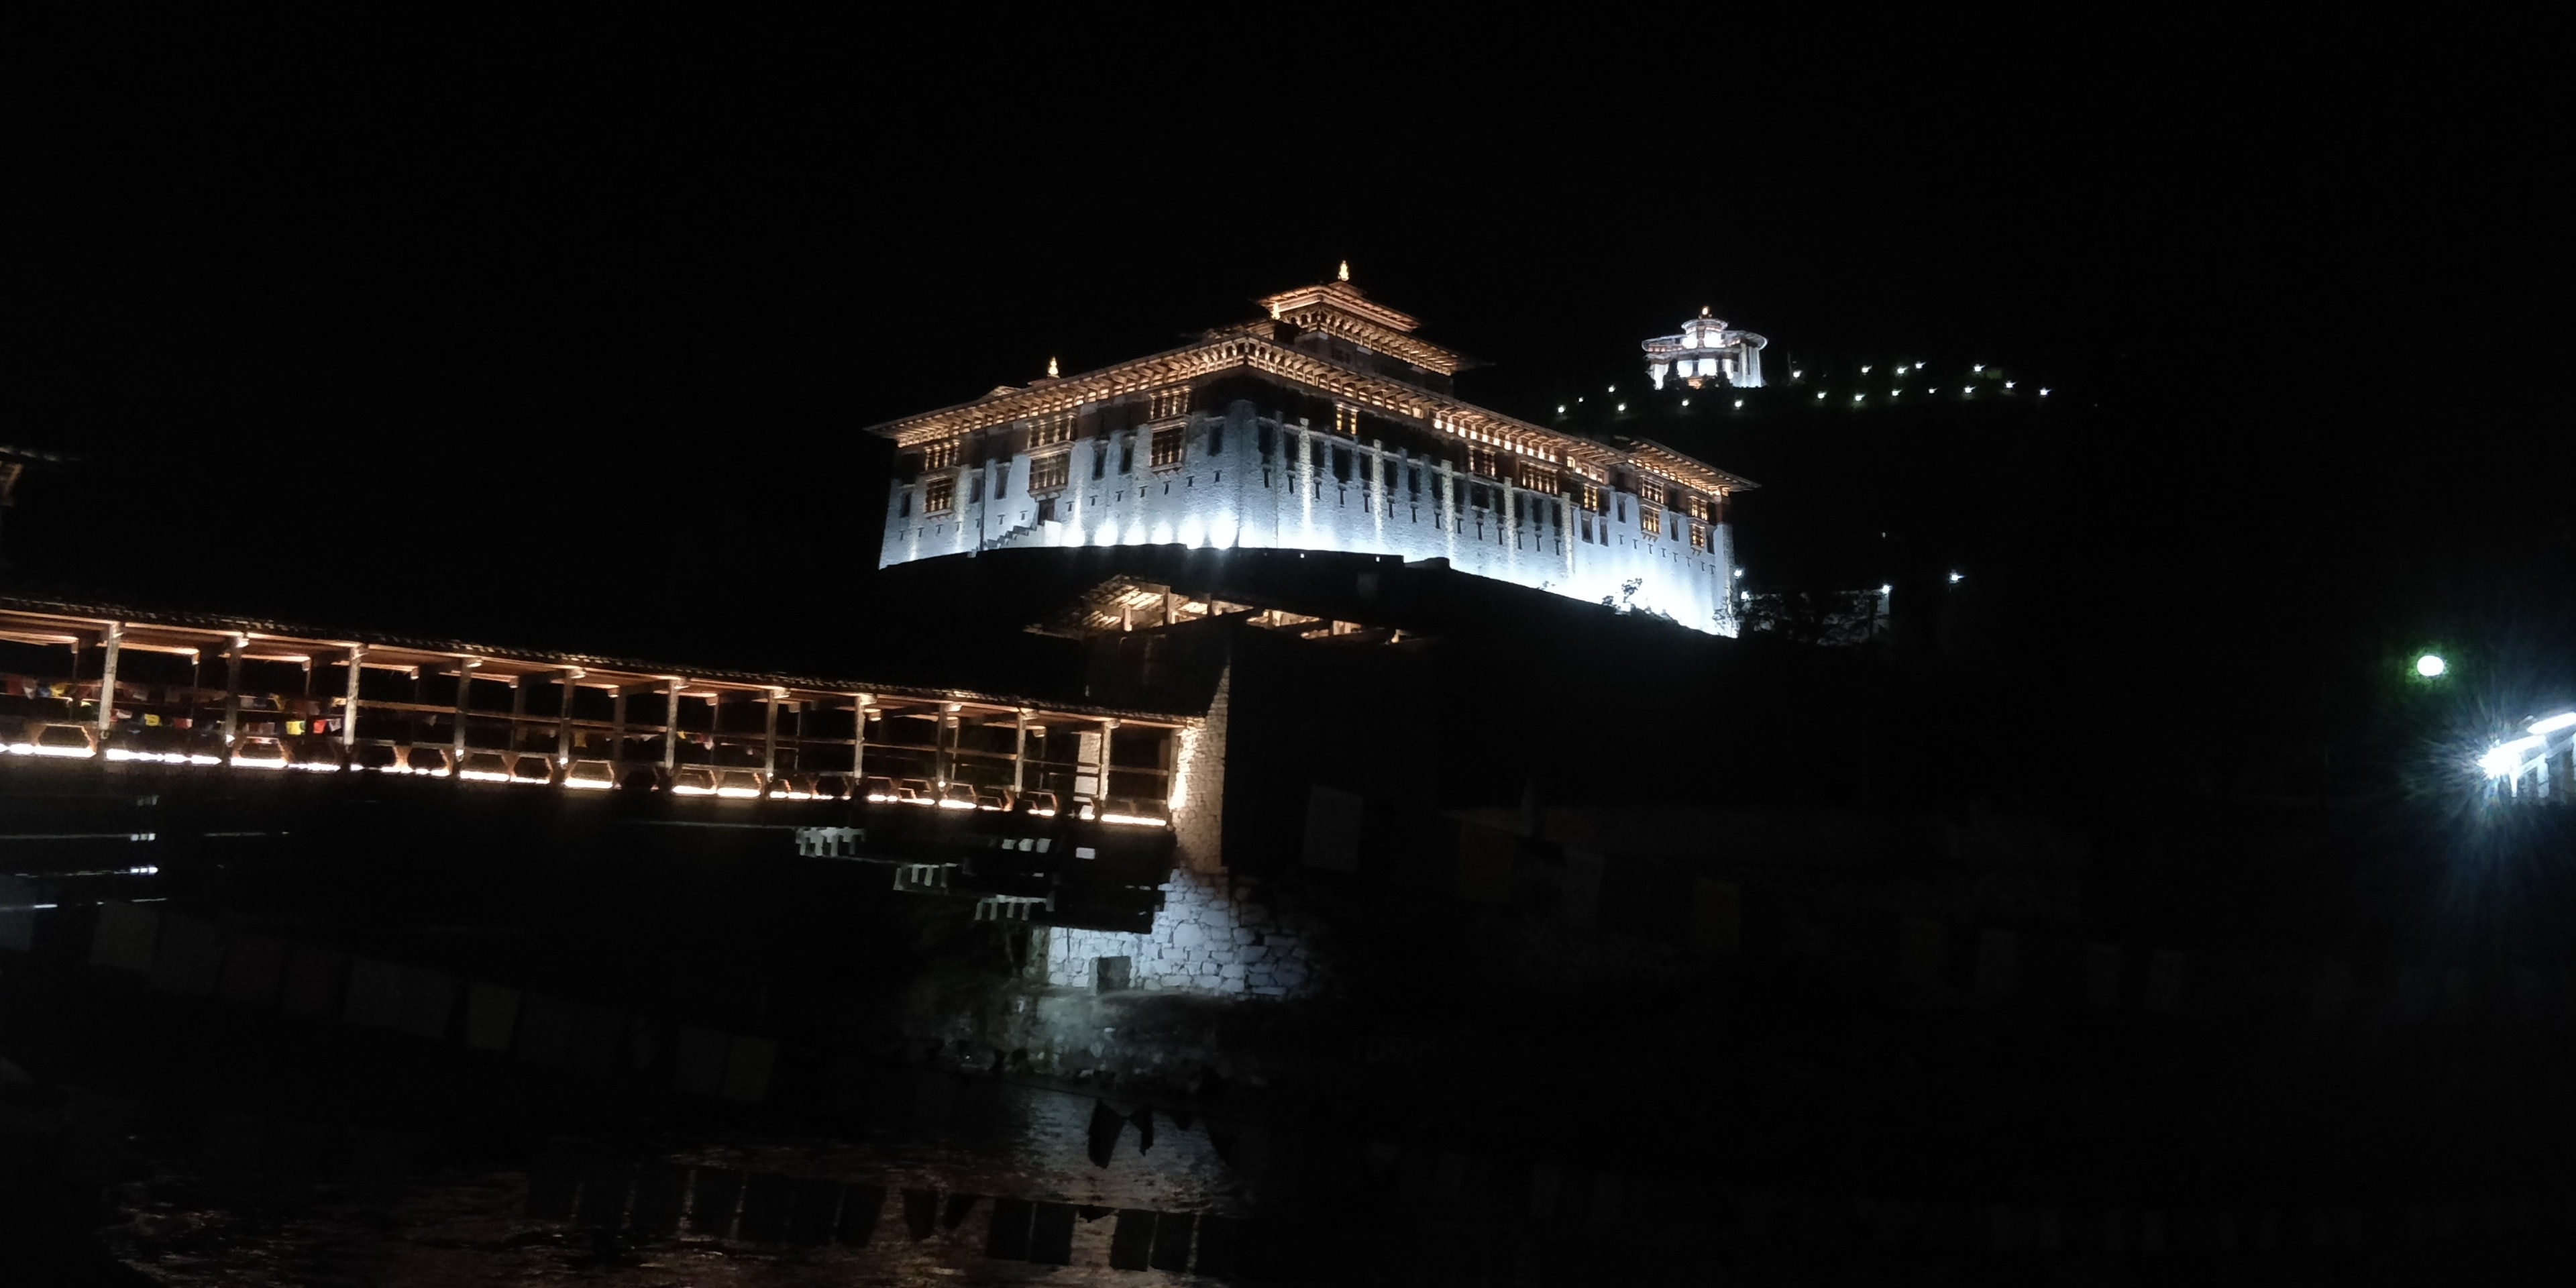 This beautiful Paro Dzong is known to be the high point of Bhutanese Architecture!!
The day view was as mesmerising as this night view!

#parodzong #bhutan101 #travels2018